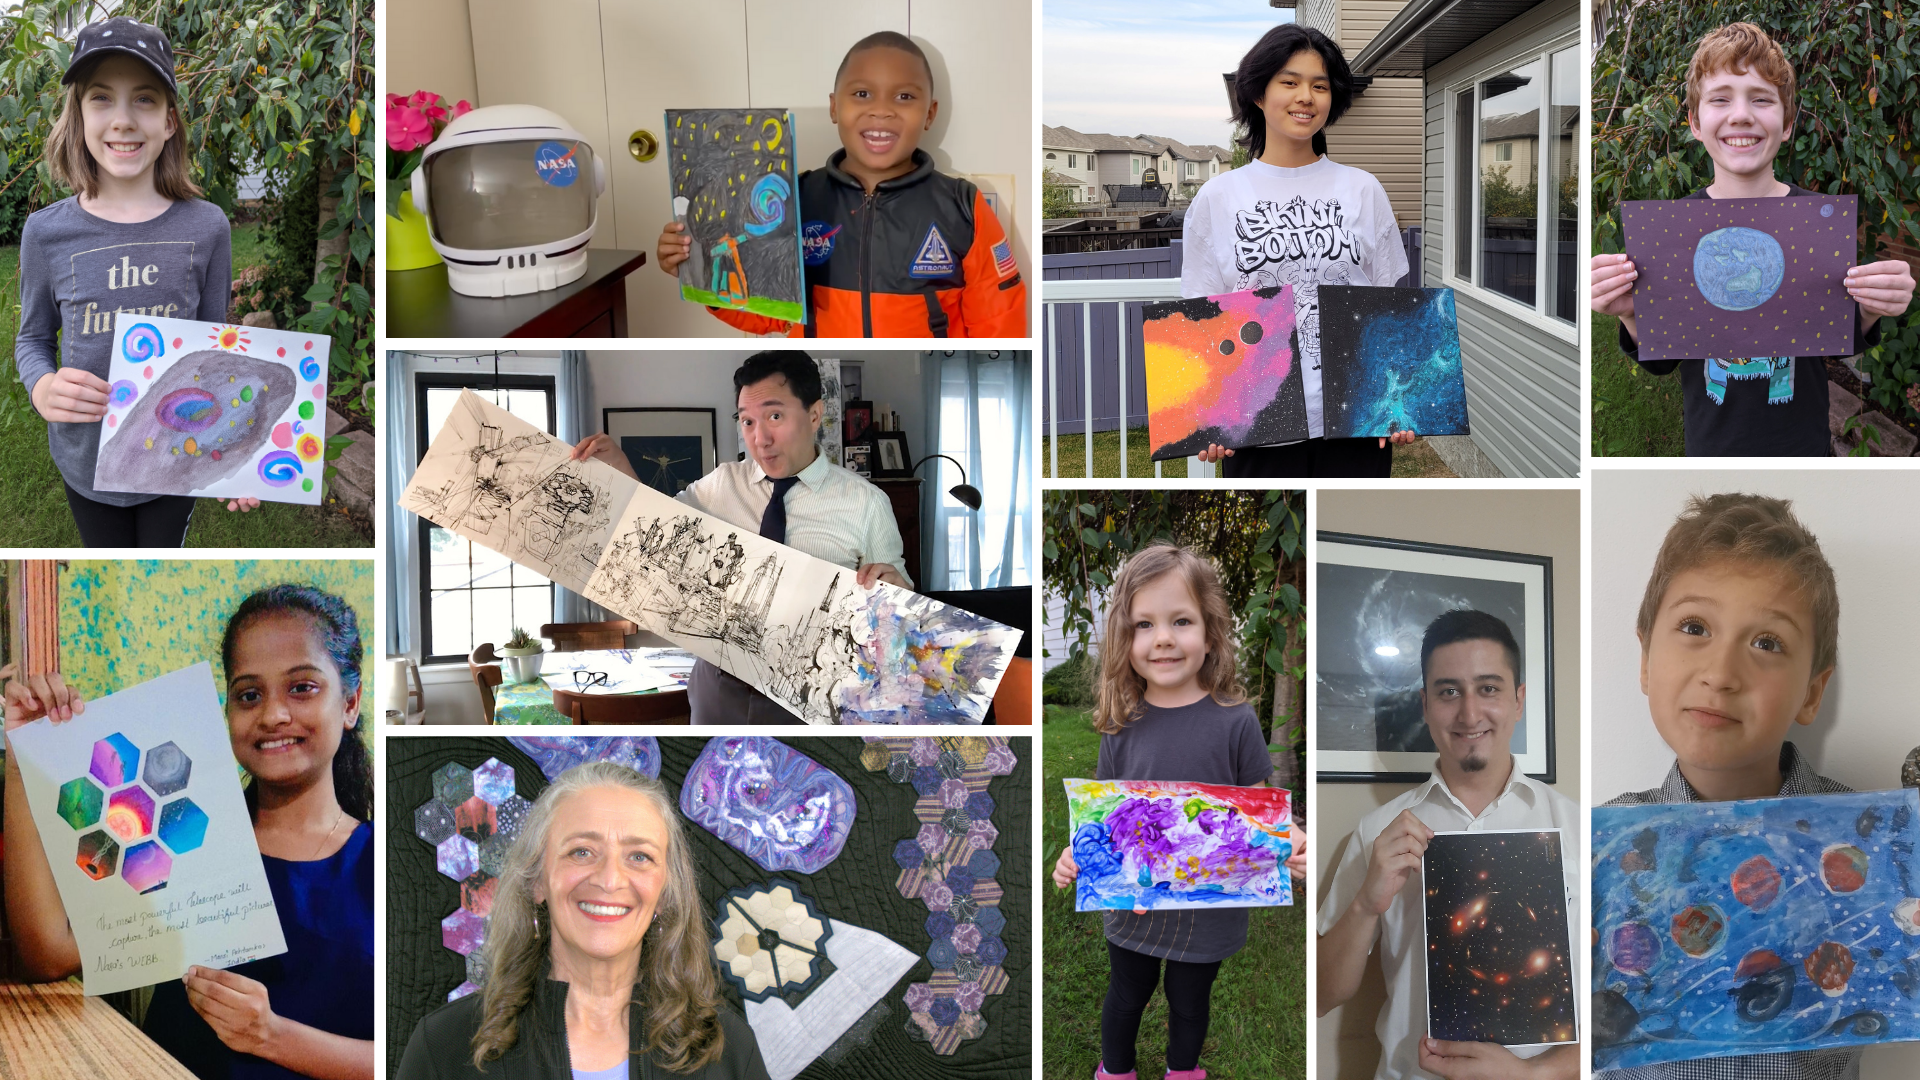 a collage if images of people showing the art they created for #UnfoldTheUniverse